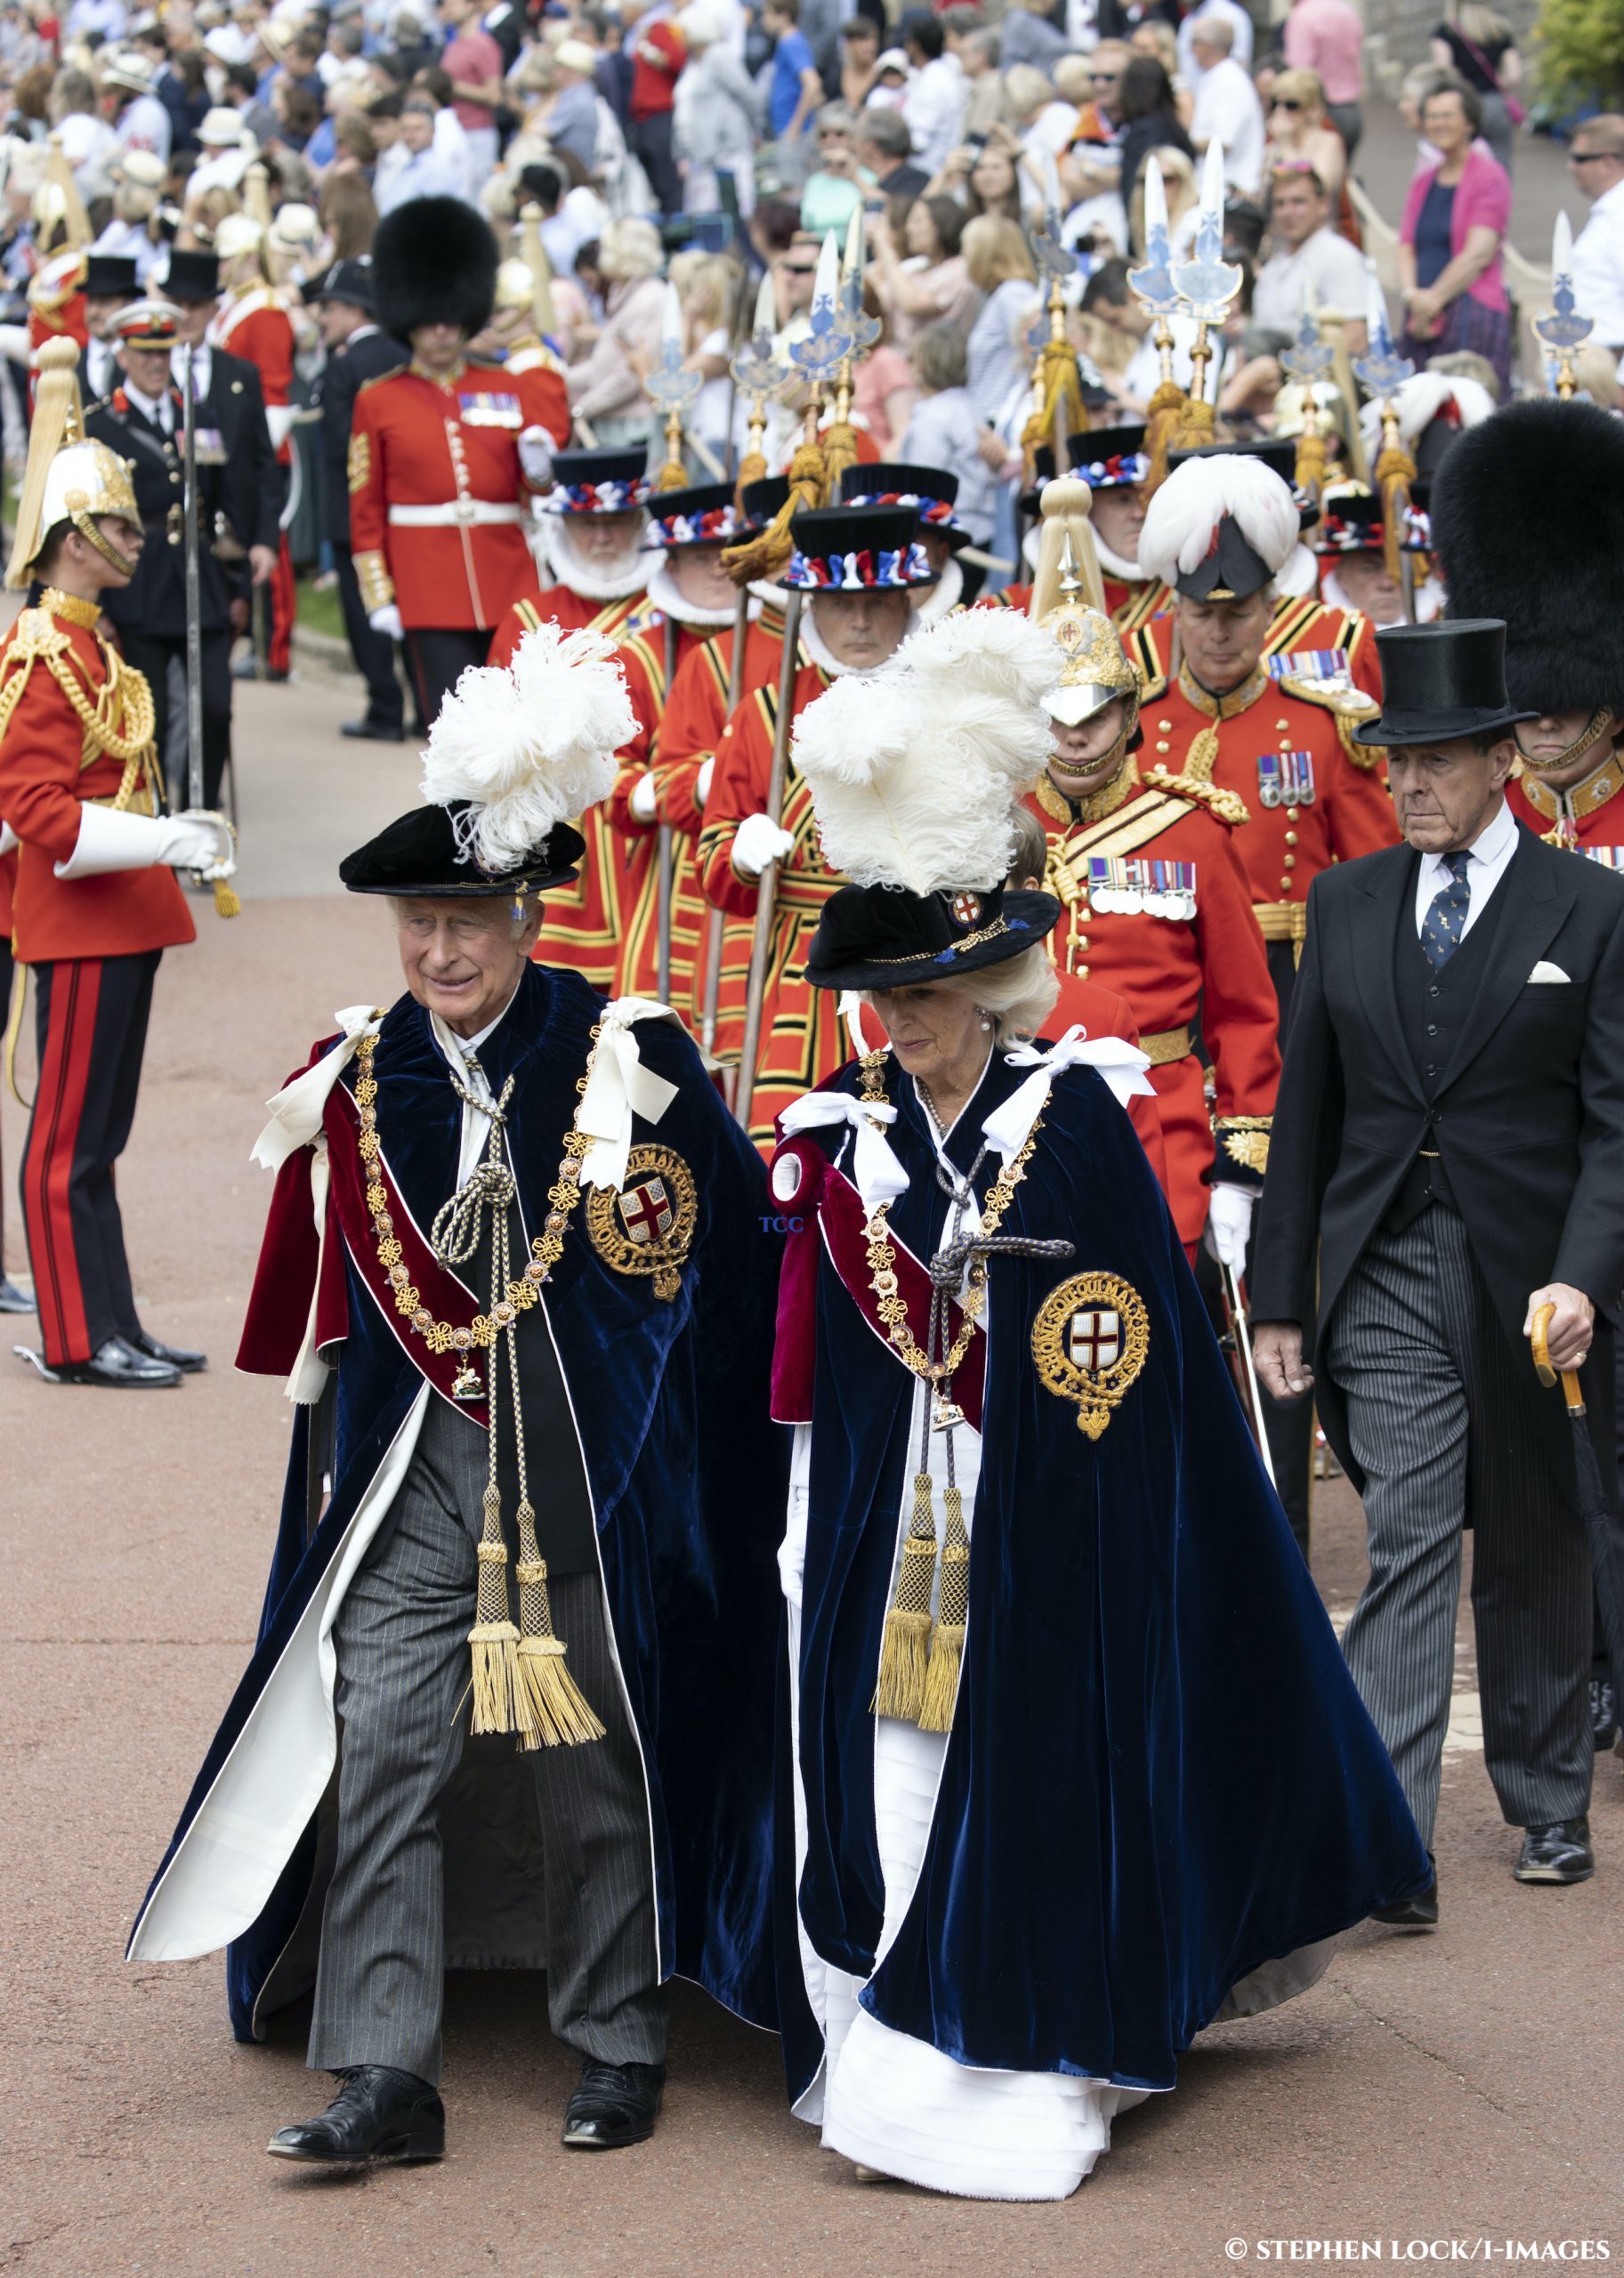 Royal Jewels to Celebrate the Order of the Garter in Windsor